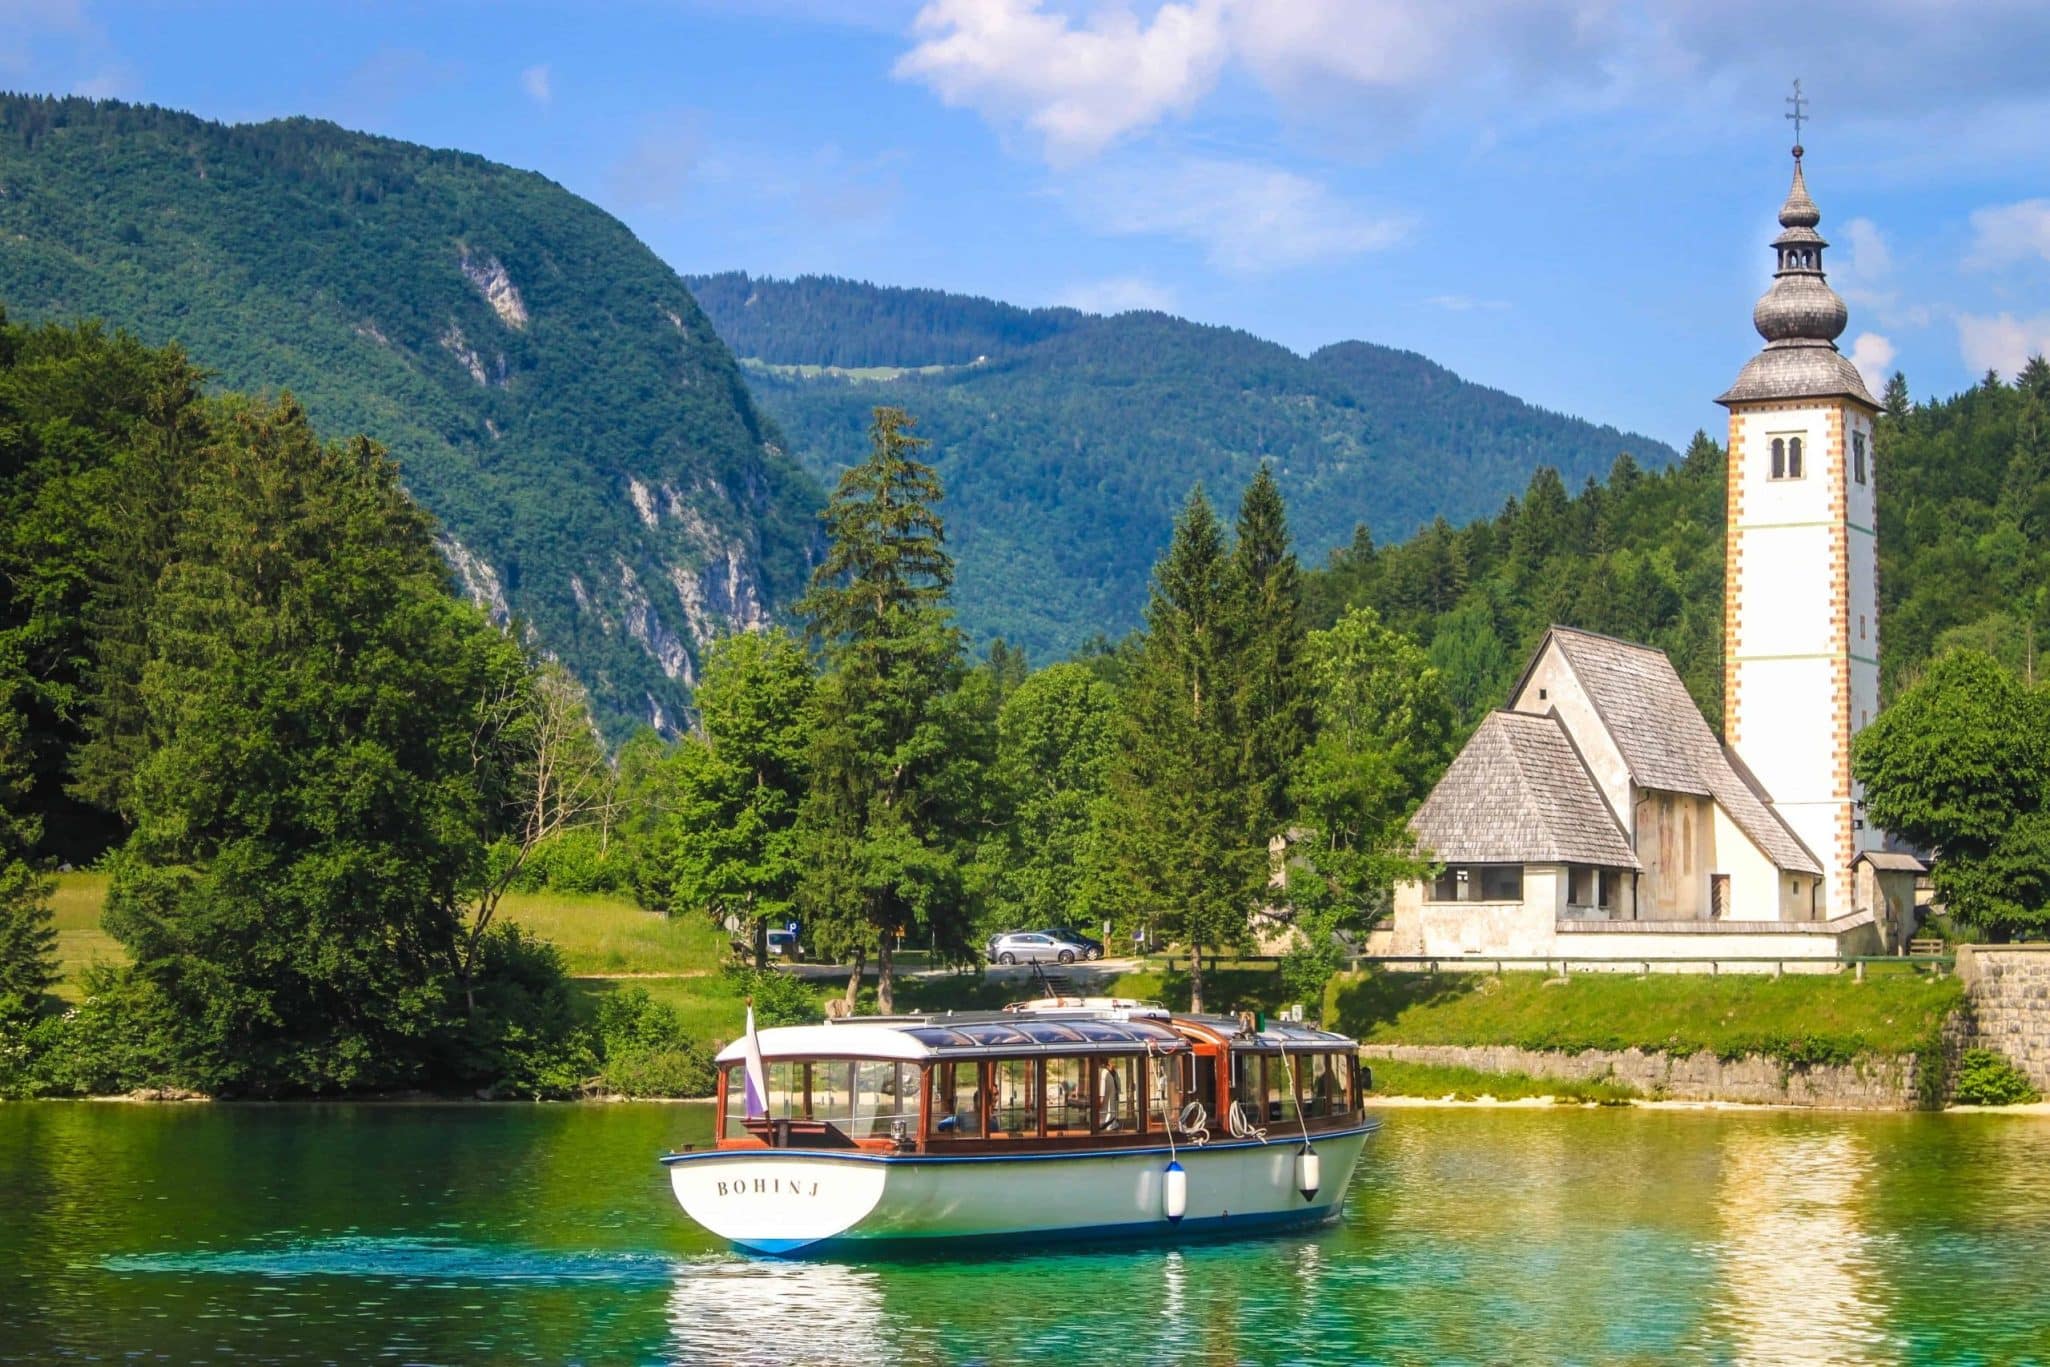 Lake Bohinj Slovenia is magical and here are 10 reasons to visit asap